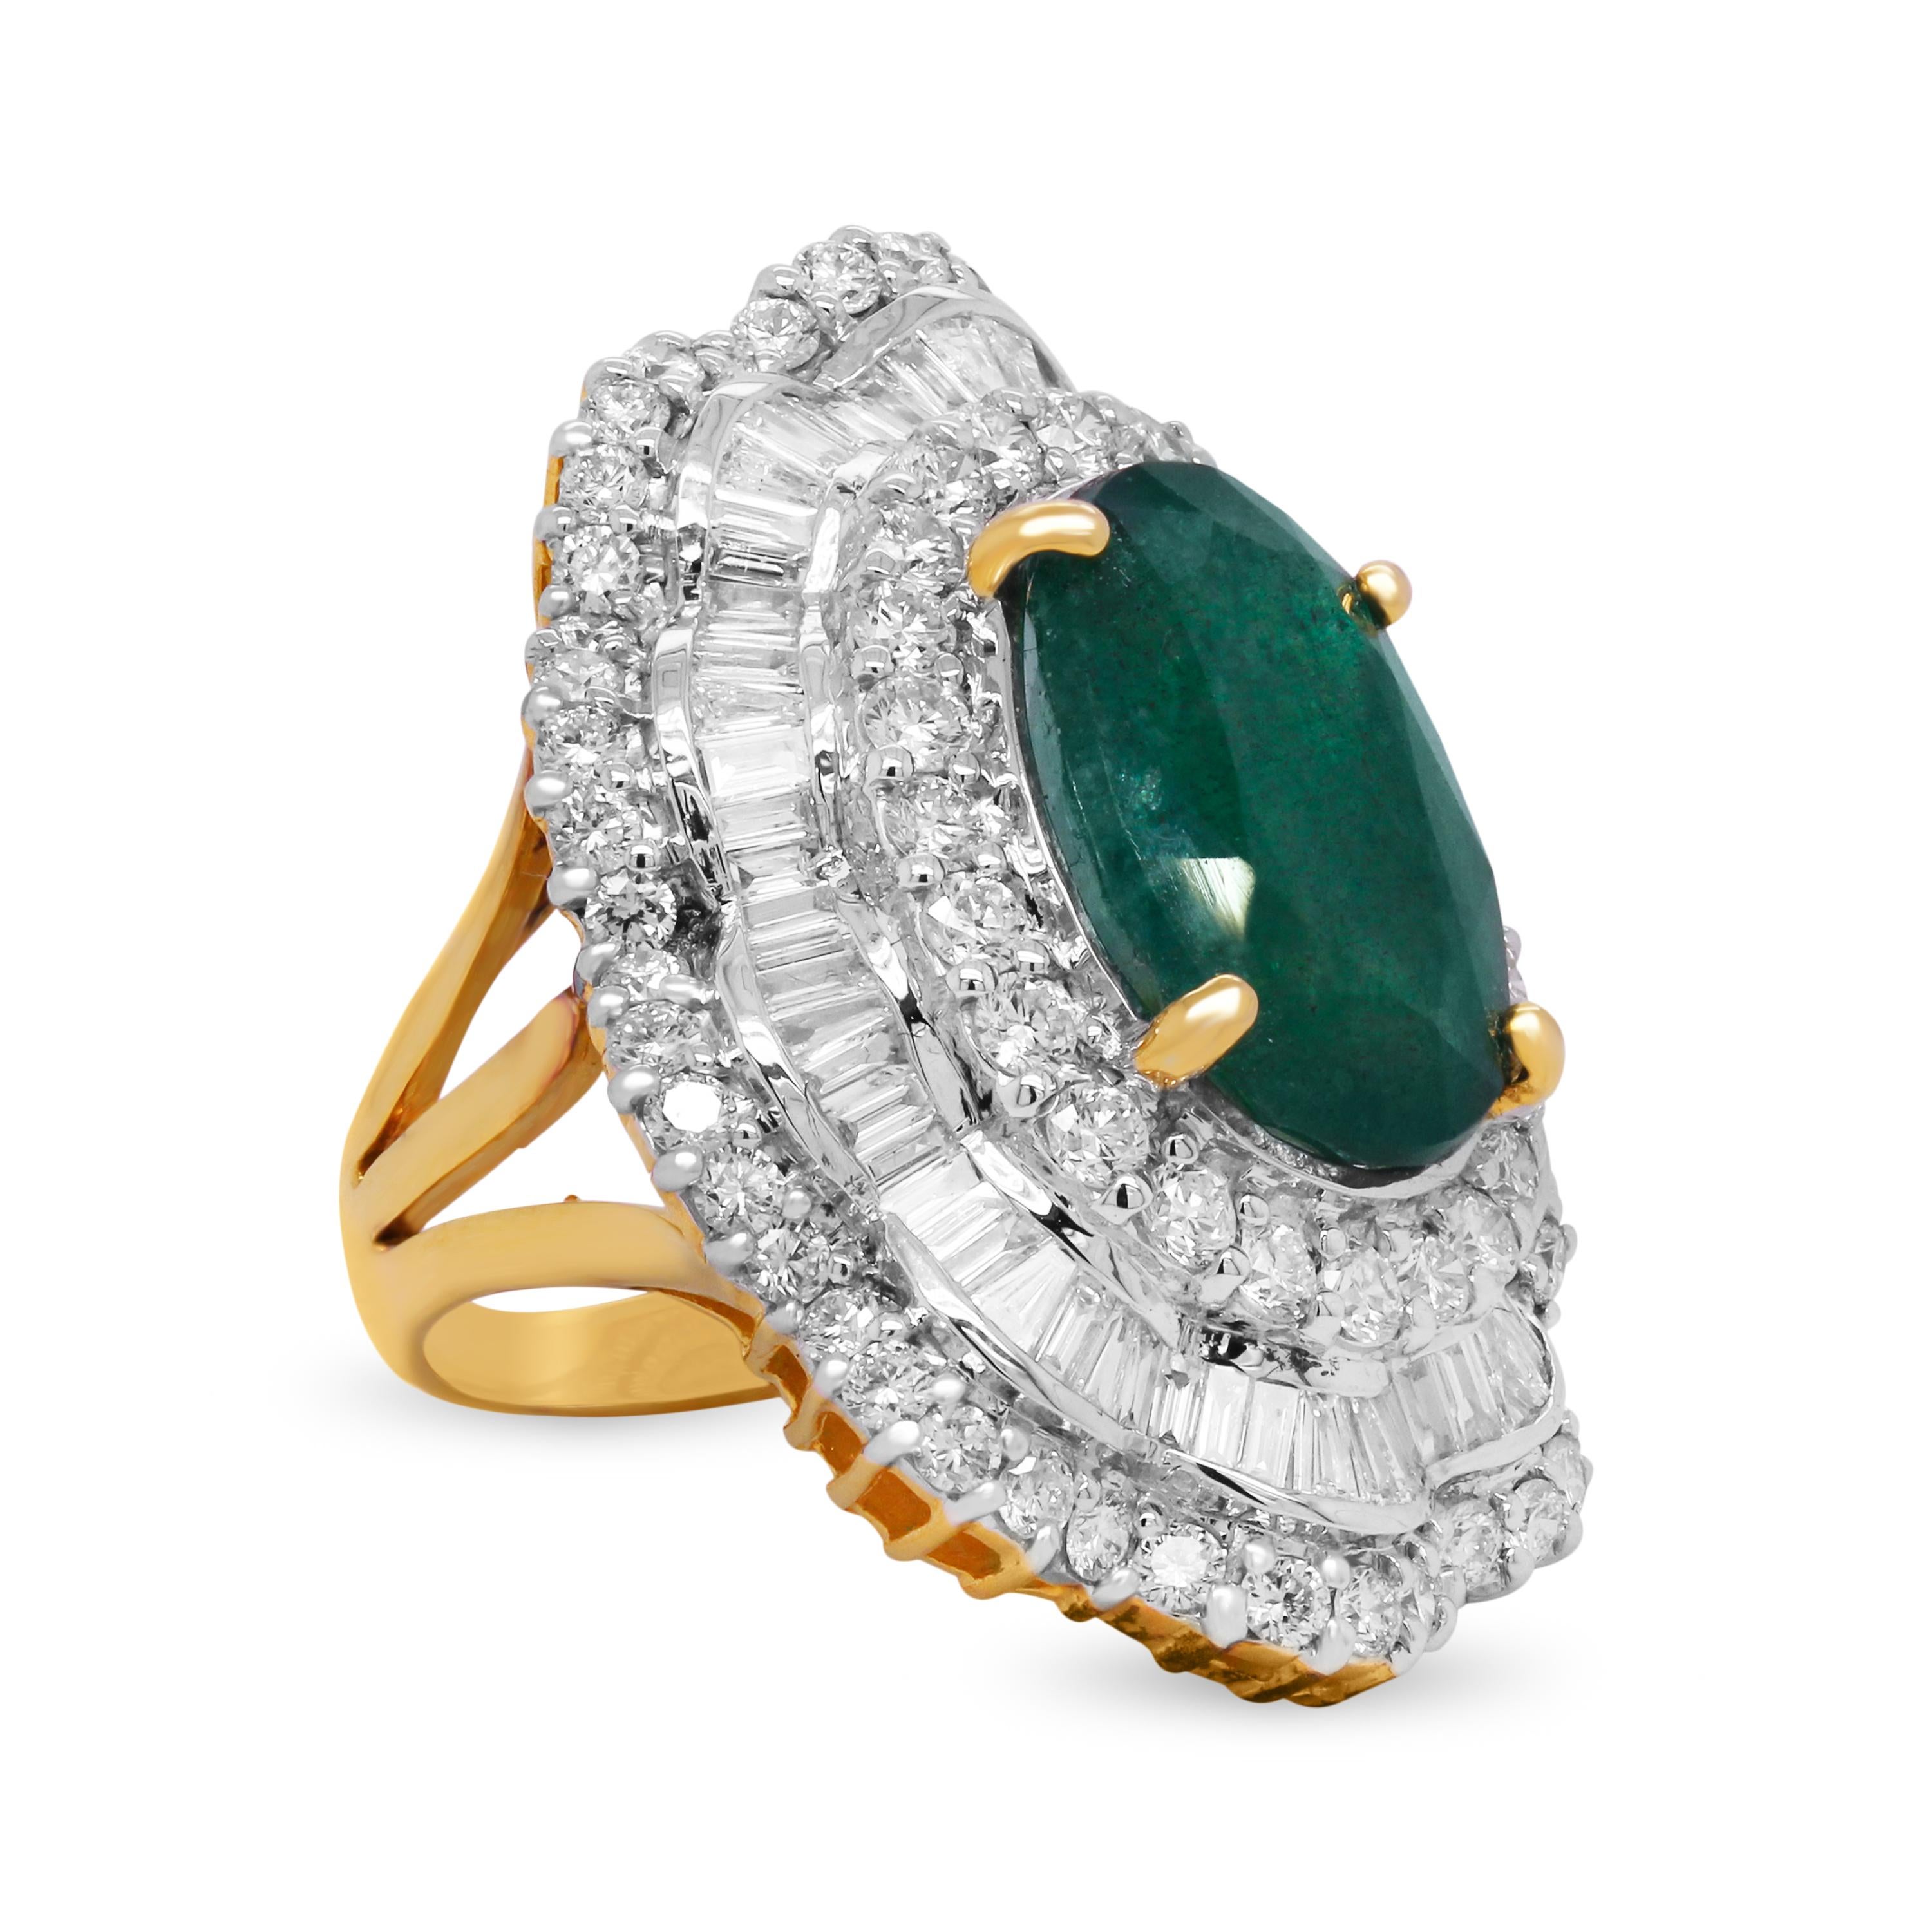 18K Gold Baguette Round Diamond Oval 8 Carat Emerald Center Cocktail Ring

This one-of-a-kind ring features an incredible, oval-cut Emerald center that is apprx. 8 carats in weight.

Baguette and round diamonds are set in three-rows surrounding the